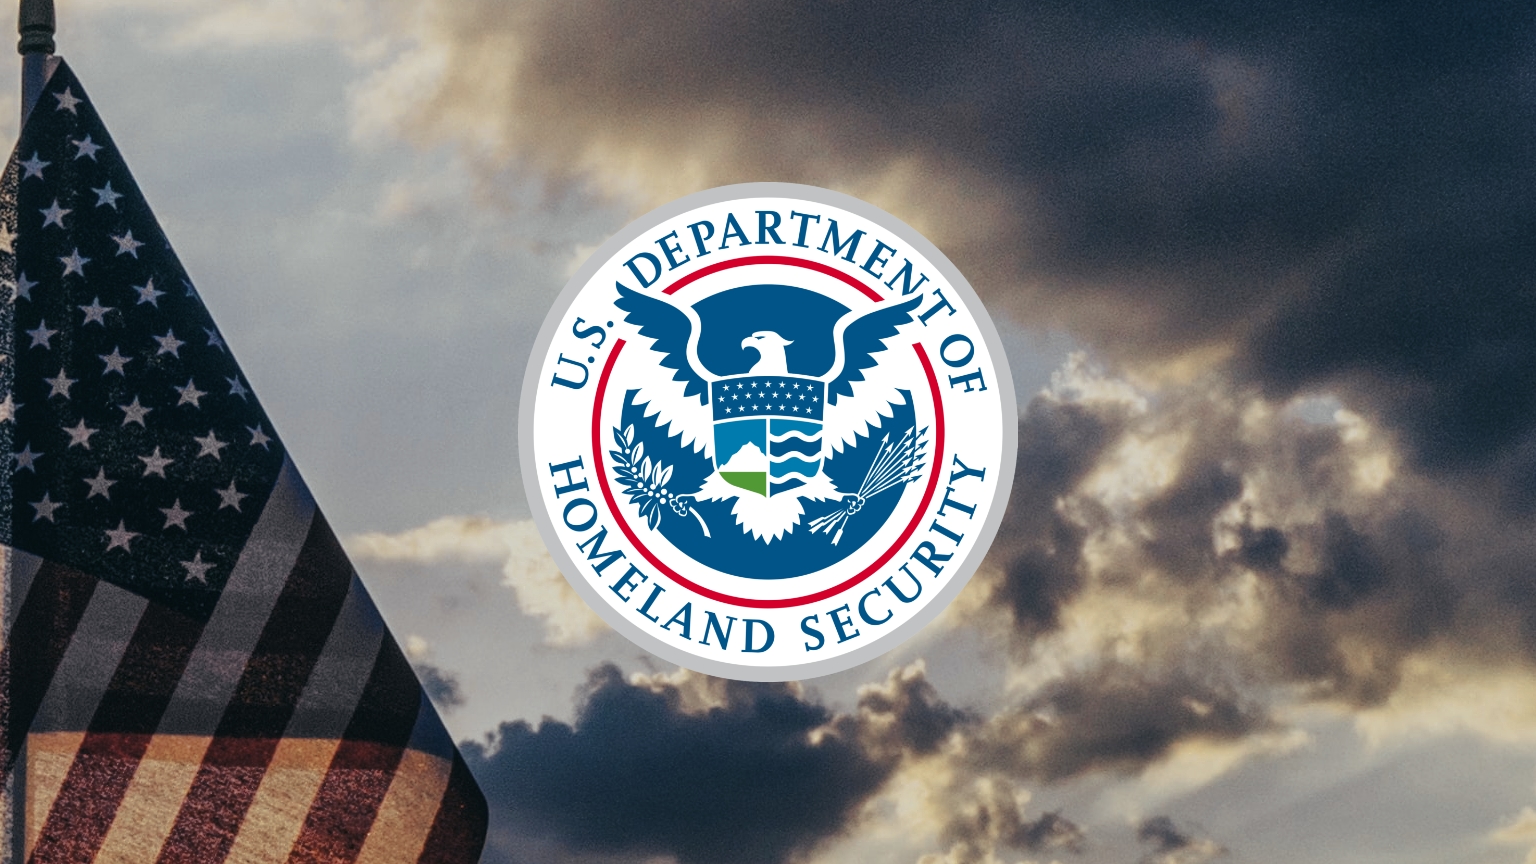 Revealed: documents show how the DHS plots to police online “misinformation”